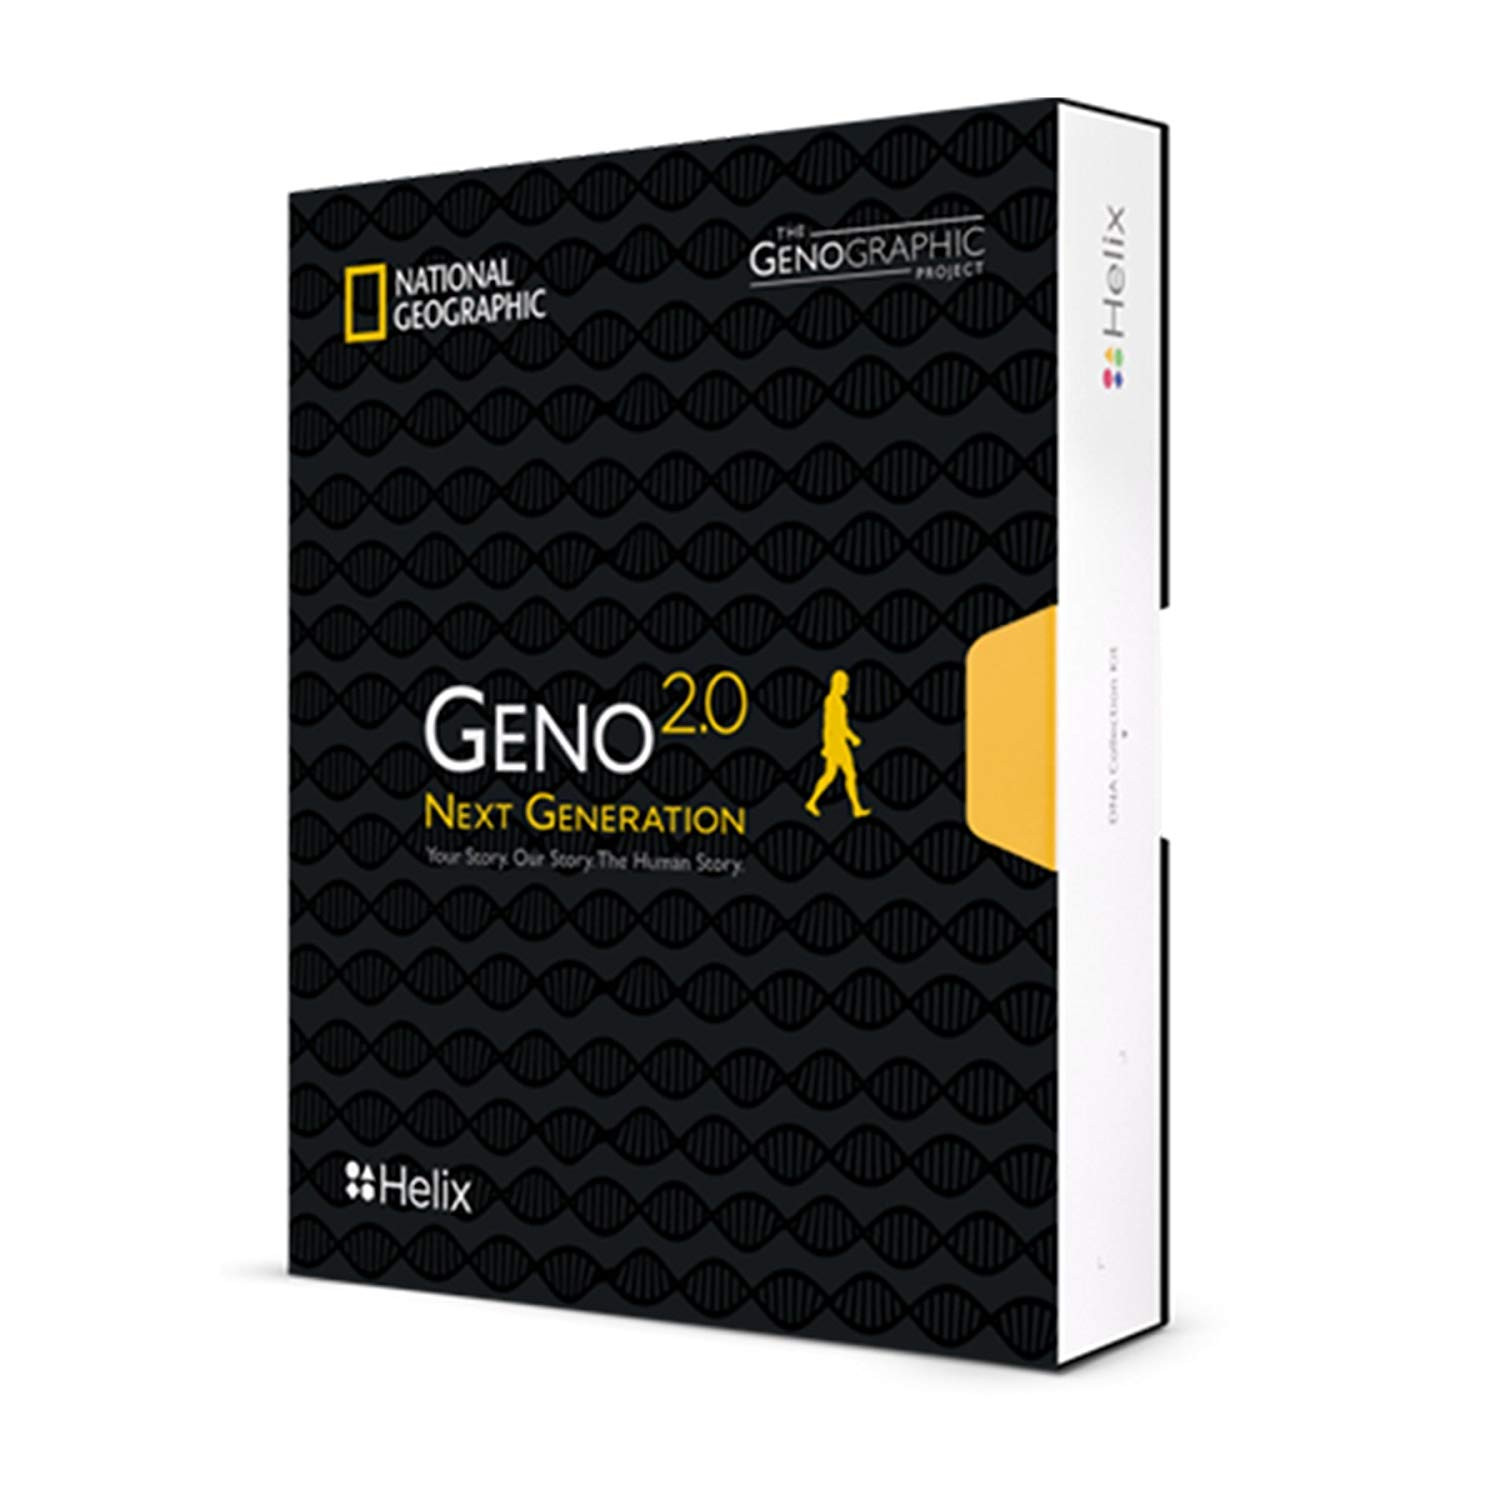 National Geographic Dna Test Kit Geno 2 0 Next Generation Ancestry Powered by Helix Of Geographics Business Card Template